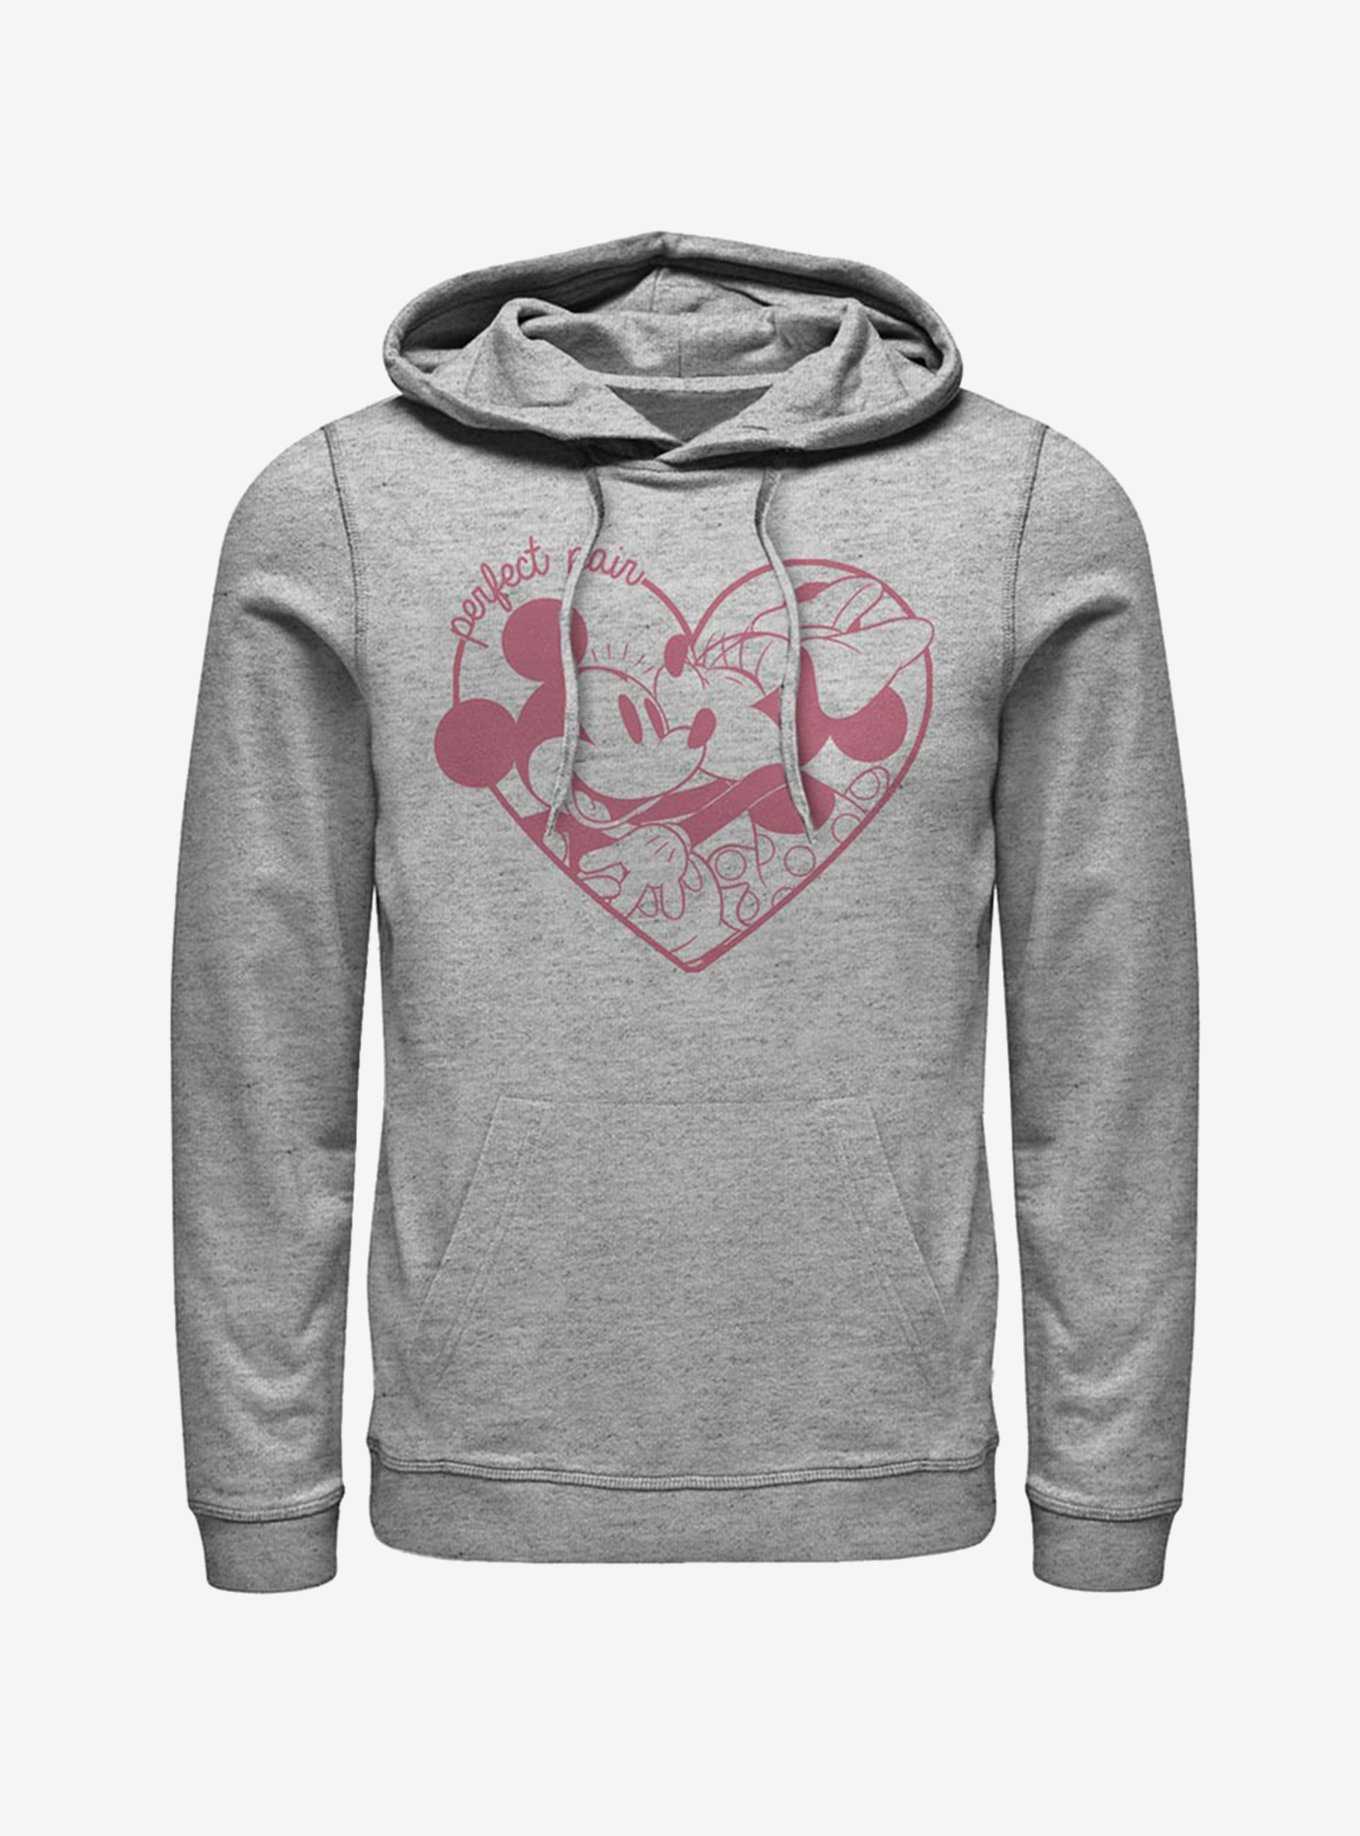 Disney Mickey Mouse & Minnie Mouse Perfect Pair Hoodie, , hi-res